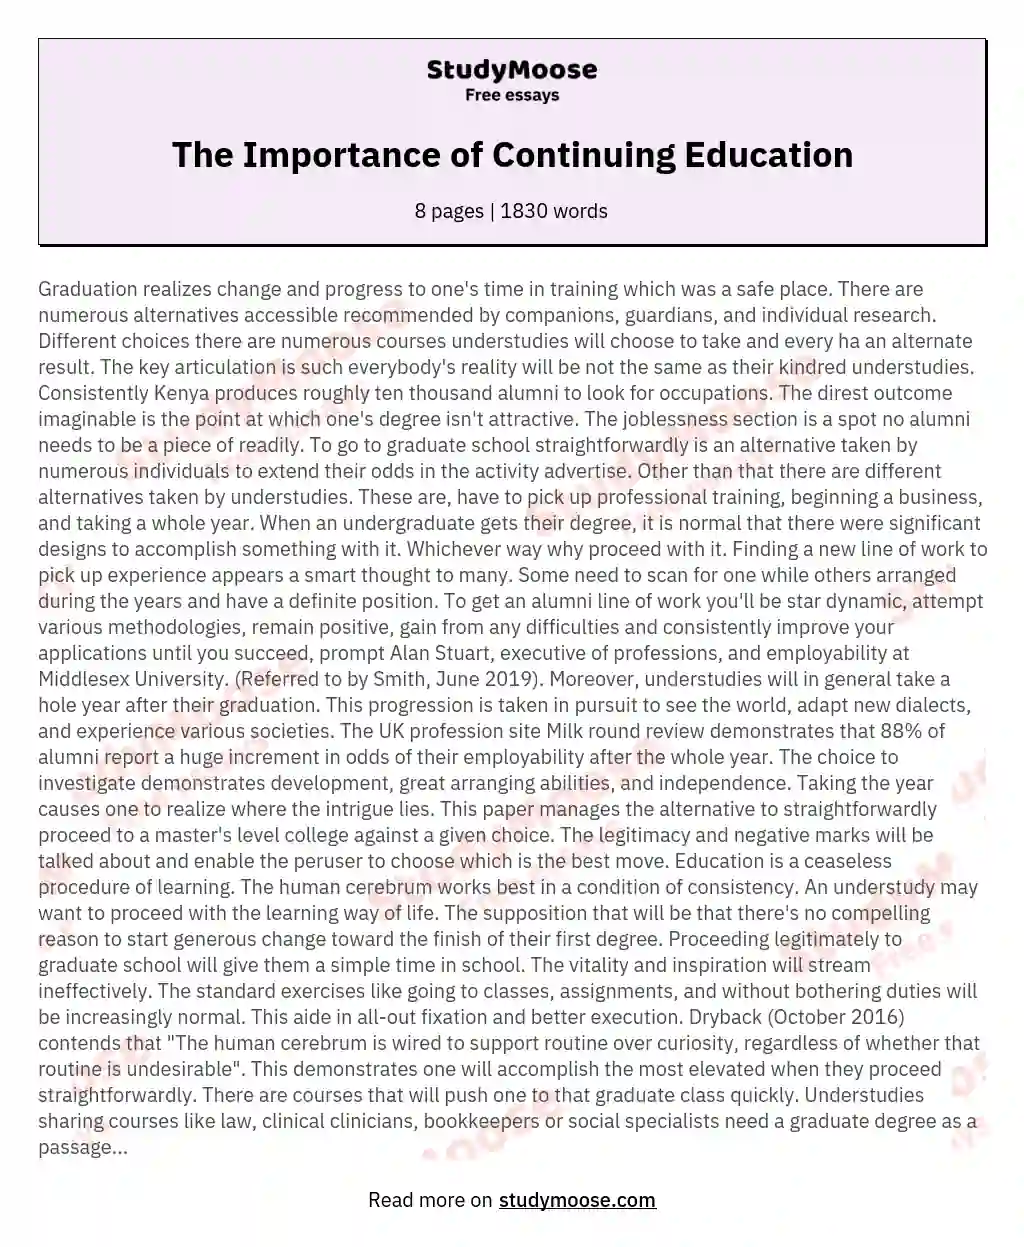 The Importance of Continuing Education essay